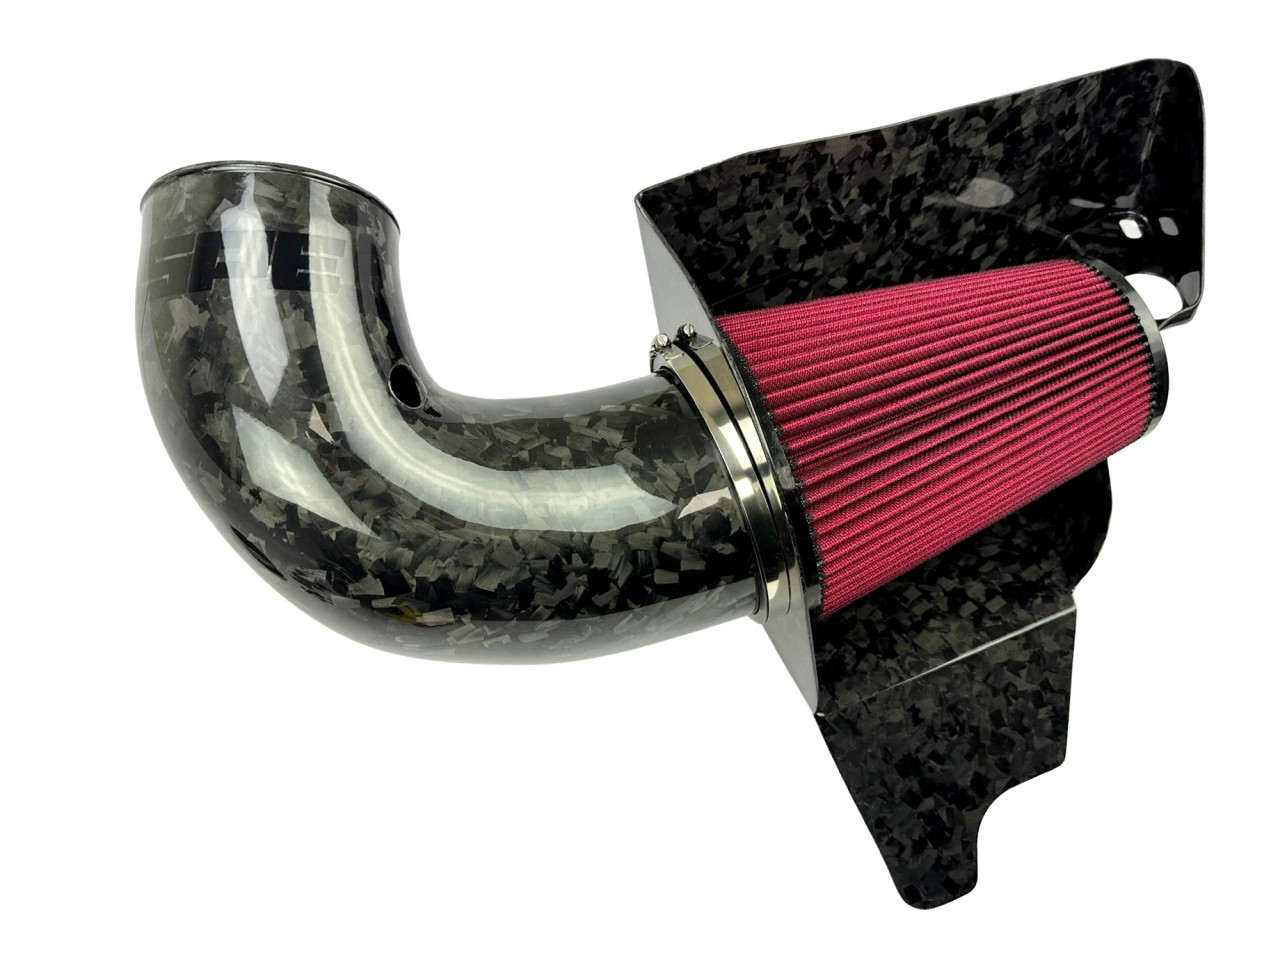 SPE STAGE 2 FORGED CARBON FIBER INTAKE for 2020+ GT500 Ford Mustang Shelby RED Filter View